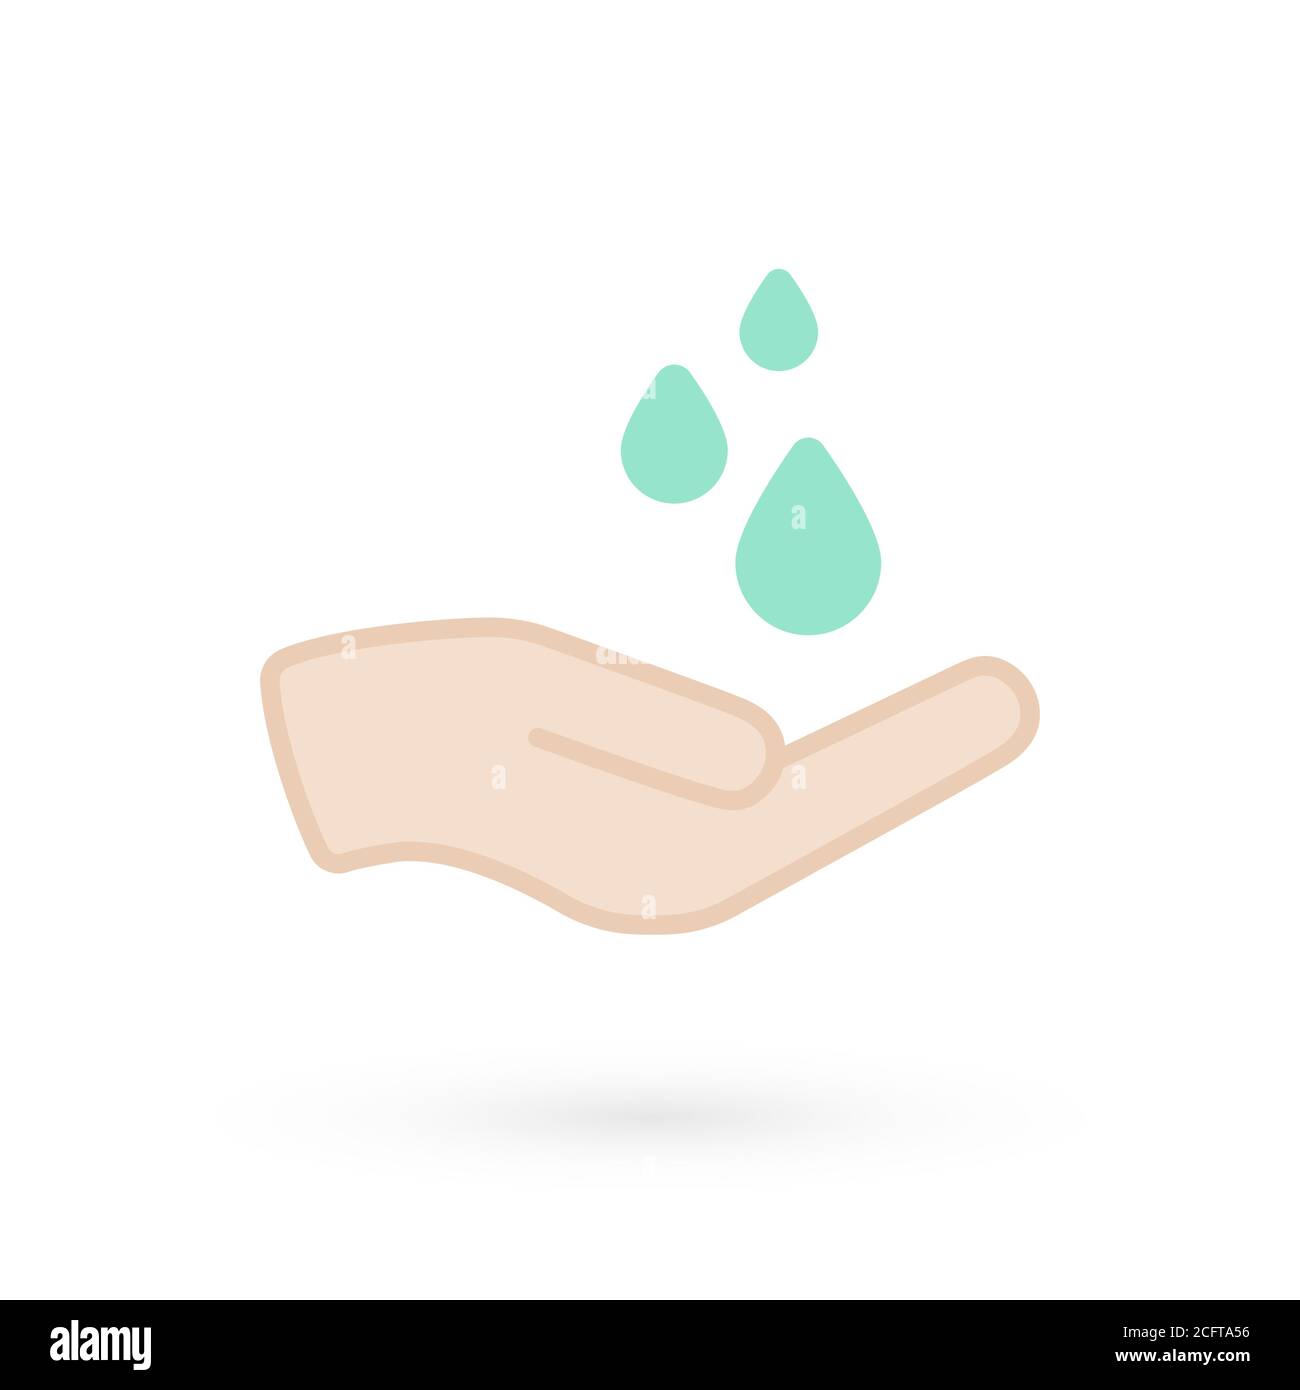 Hand washing icon. Hand with water symbol. Prevention against viruses, bacteria, flu, coronavirus. Concept of hygiene, cleanliness, disinfection. Stock Vector